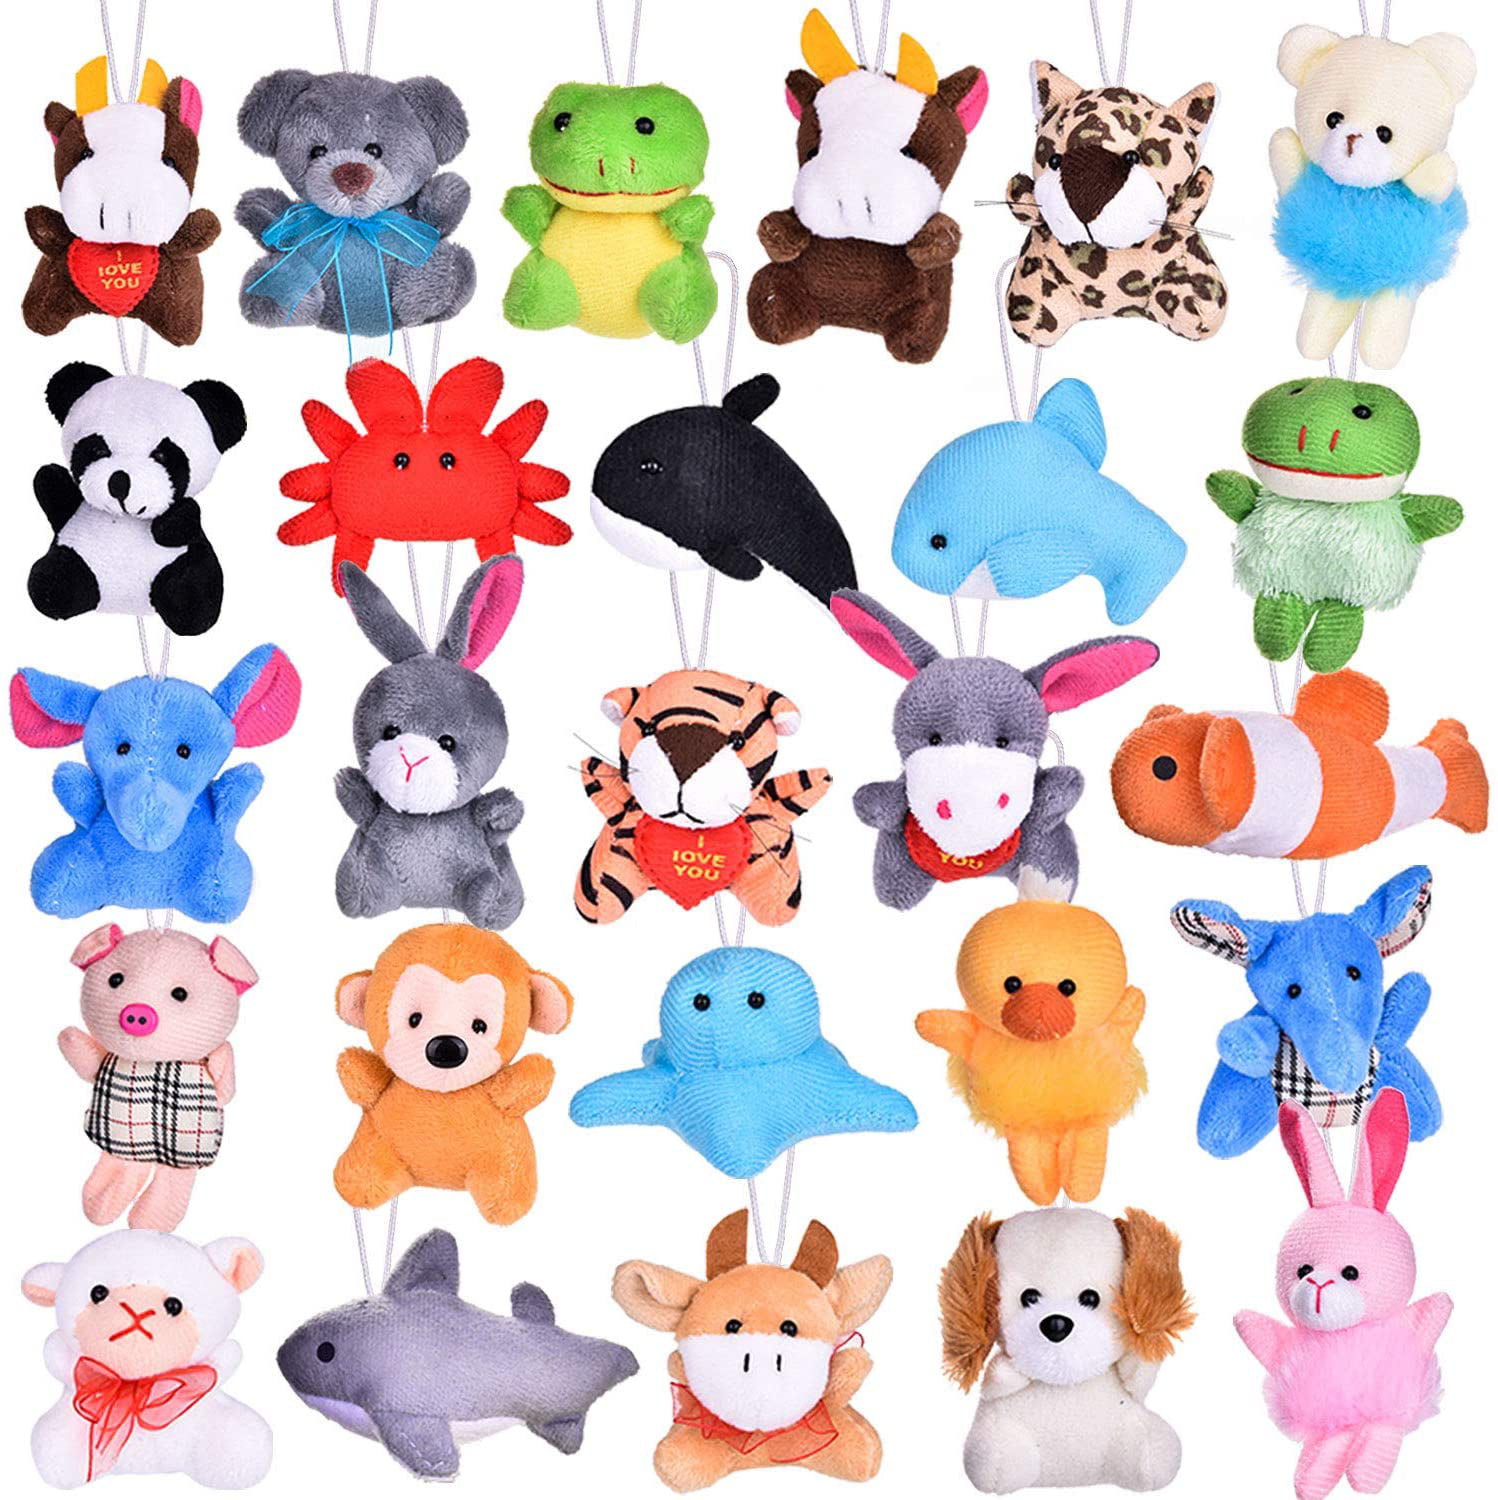 animal keychains with alphabet letters Personalised plush soft toys